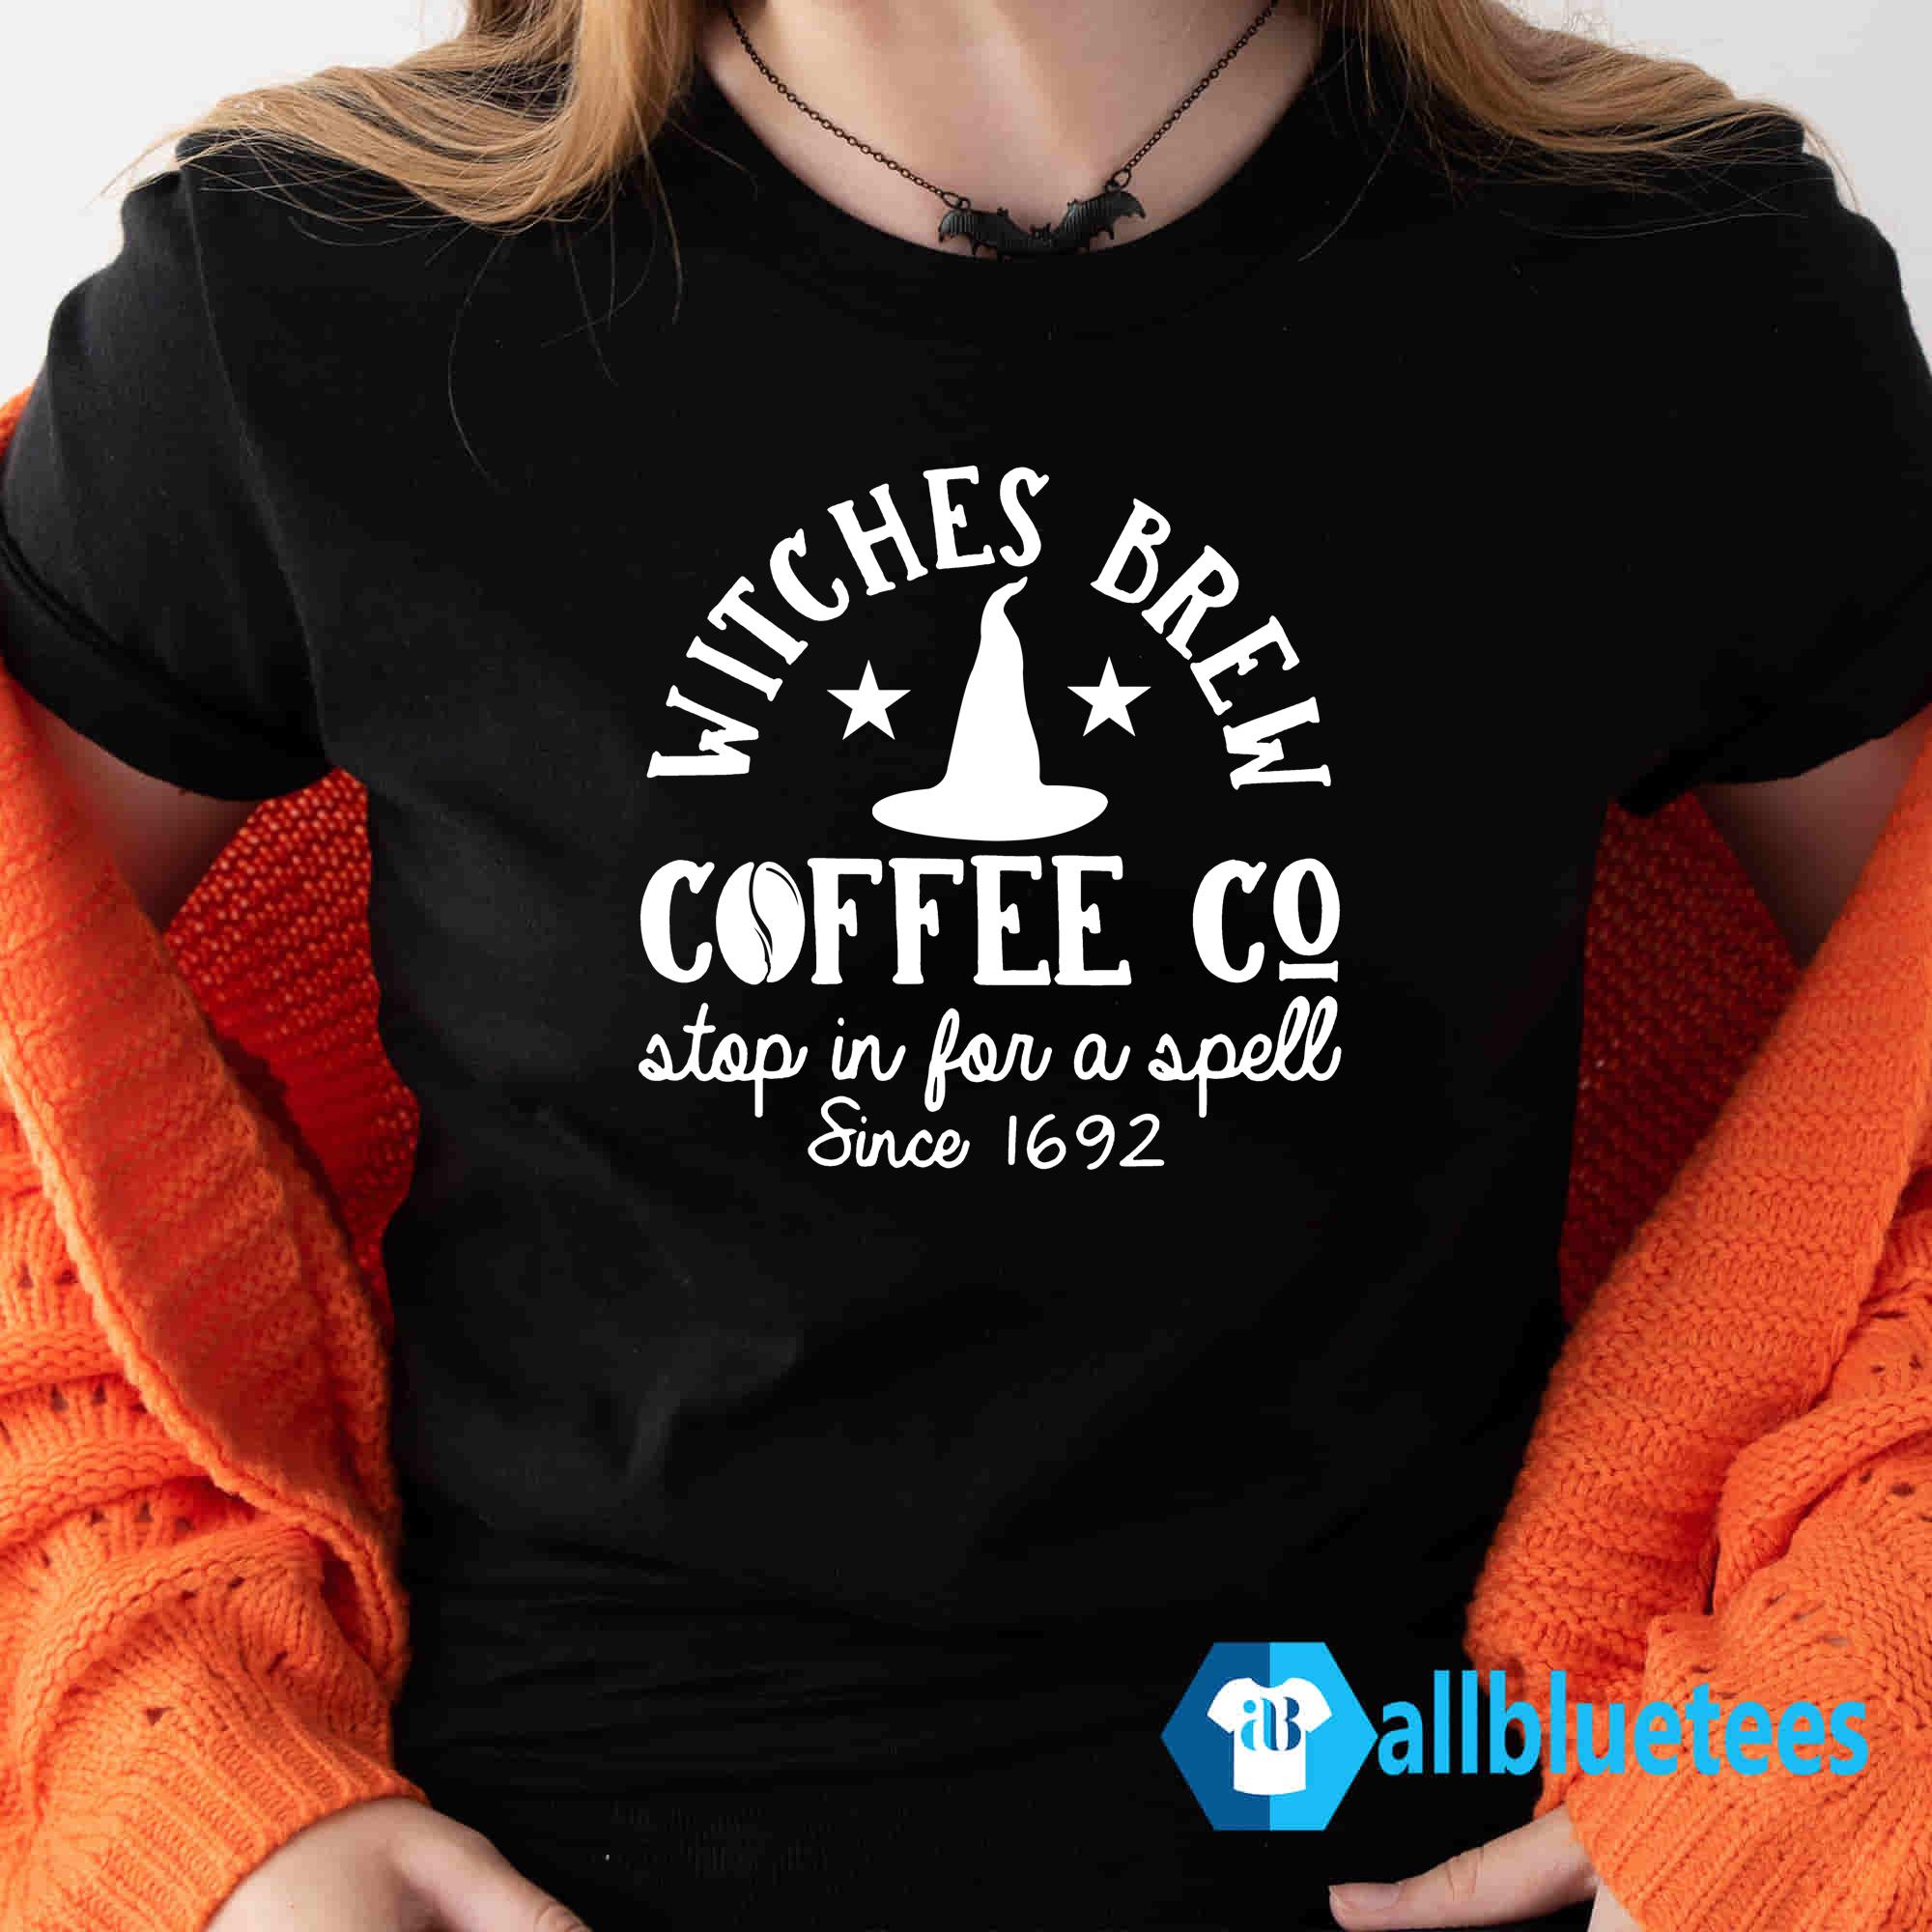 Witches Brew Cafecito | Cold Cup Wrap